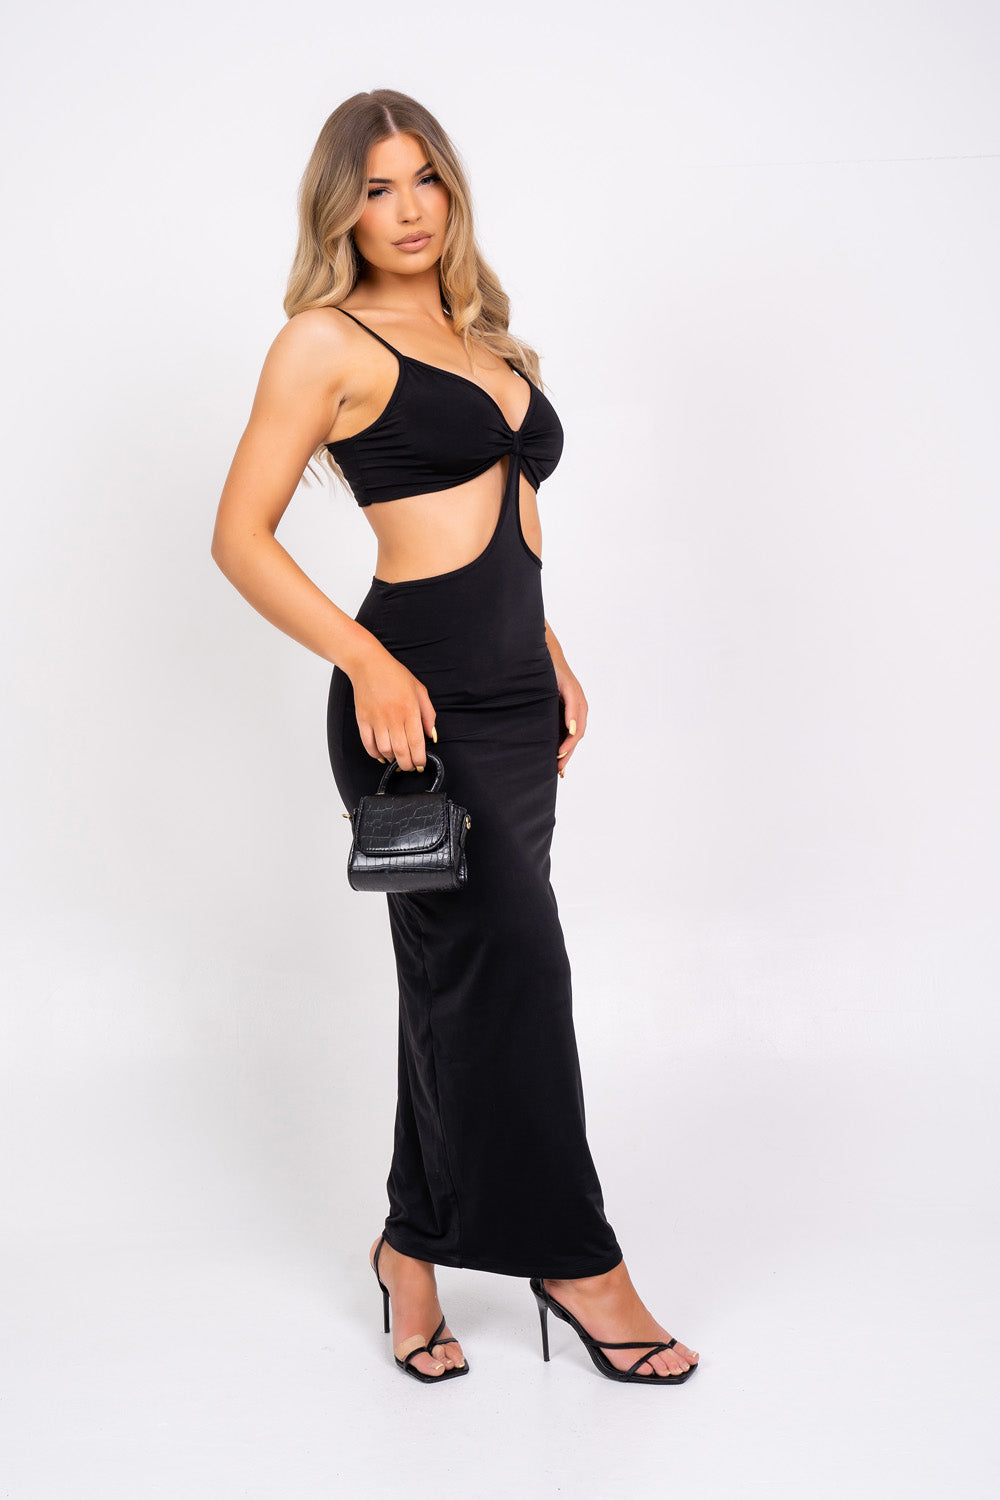 Over It Black Slinky Bodycon Strappy Cut Out Maxi Dress – Nazz Collection